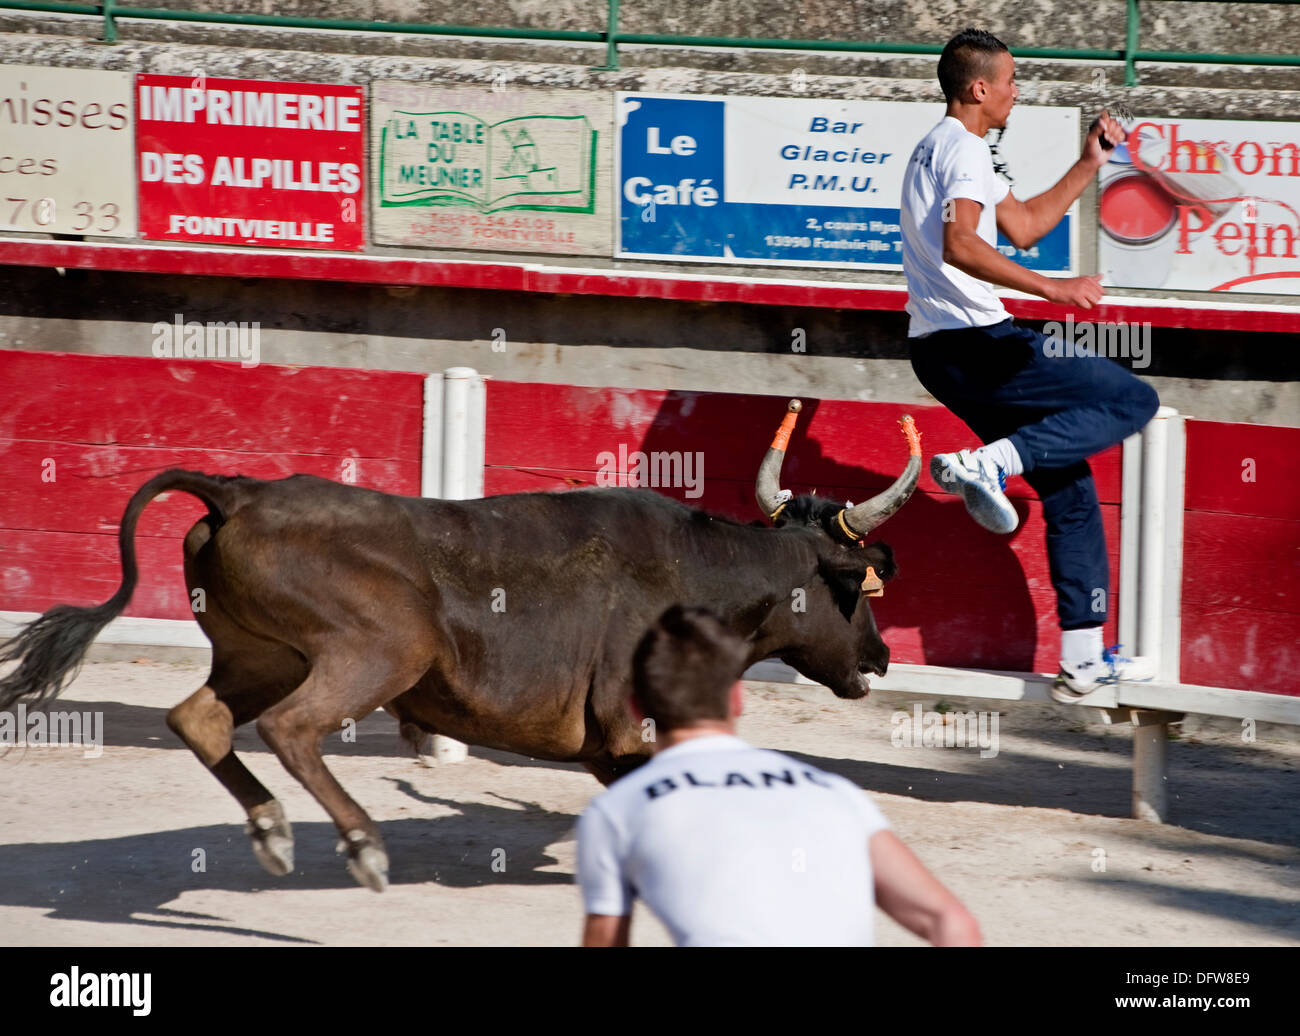 French bull fighting,Course Camarguaise,Bullfighting, Fontvieille France,Bull fighter and bull,at full charge, David Collingwood Stock Photo